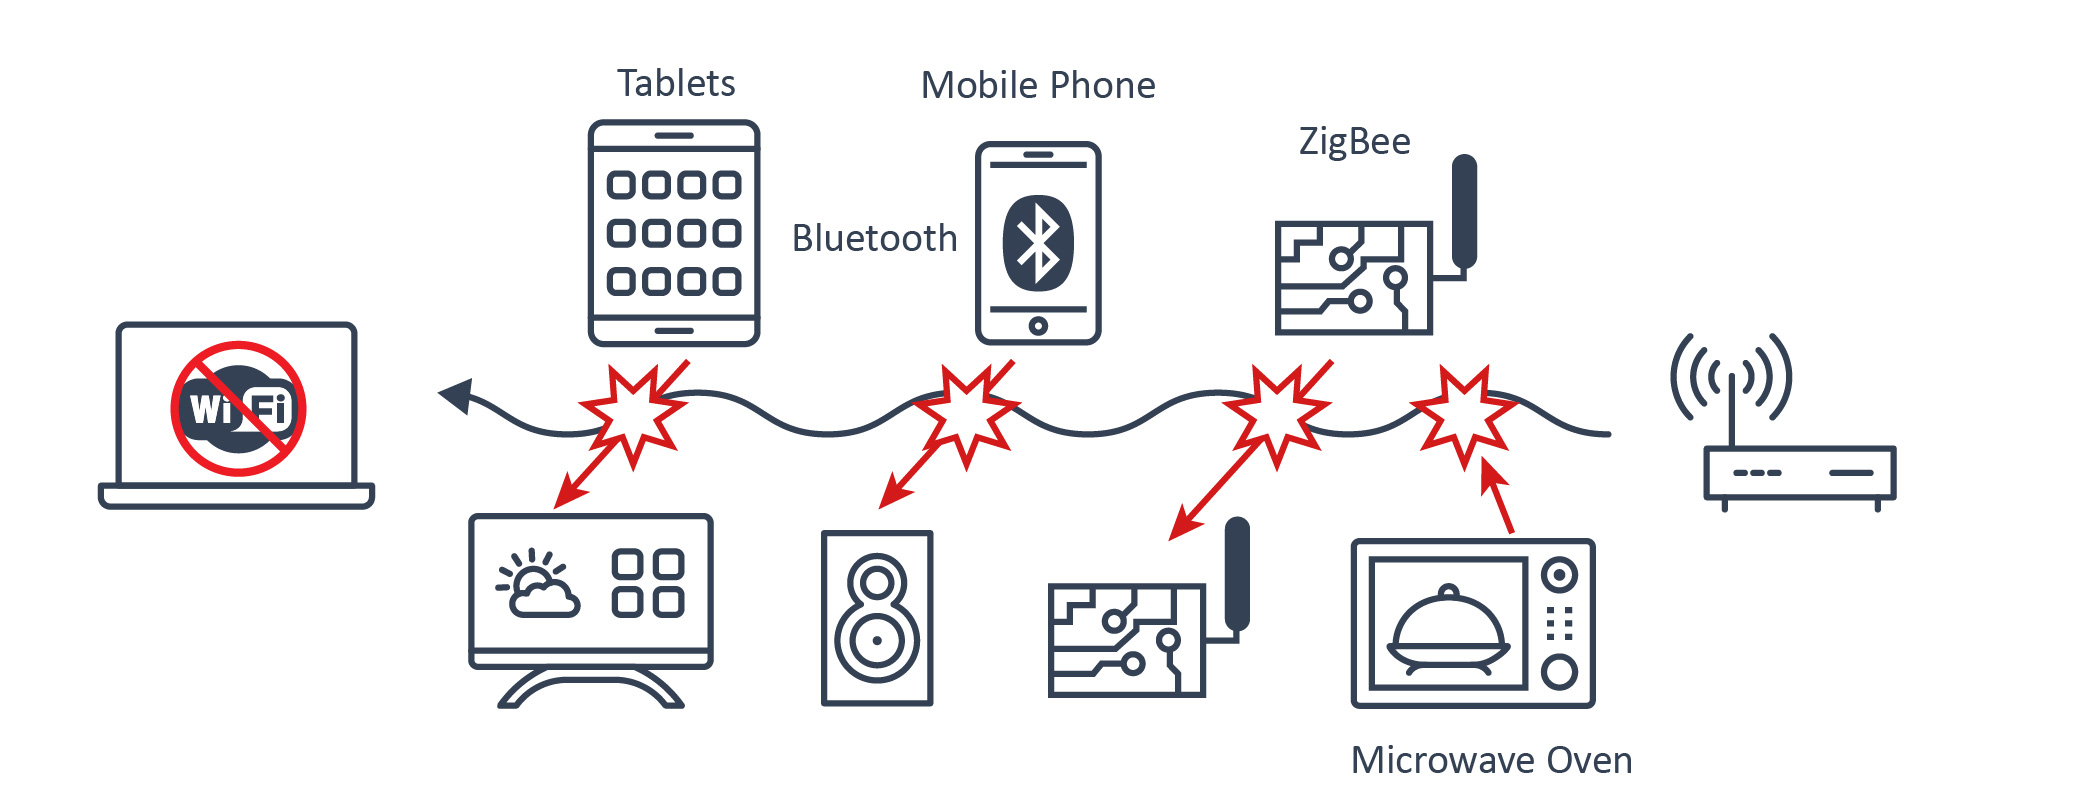 Keep devices within range: Make sure that your Bluetooth headset and laptop are within the recommended range for a stable connection.
Avoid crowded areas: Interference from other Bluetooth devices or Wi-Fi networks can disrupt the connection. Stay away from crowded areas with multiple electronic devices.